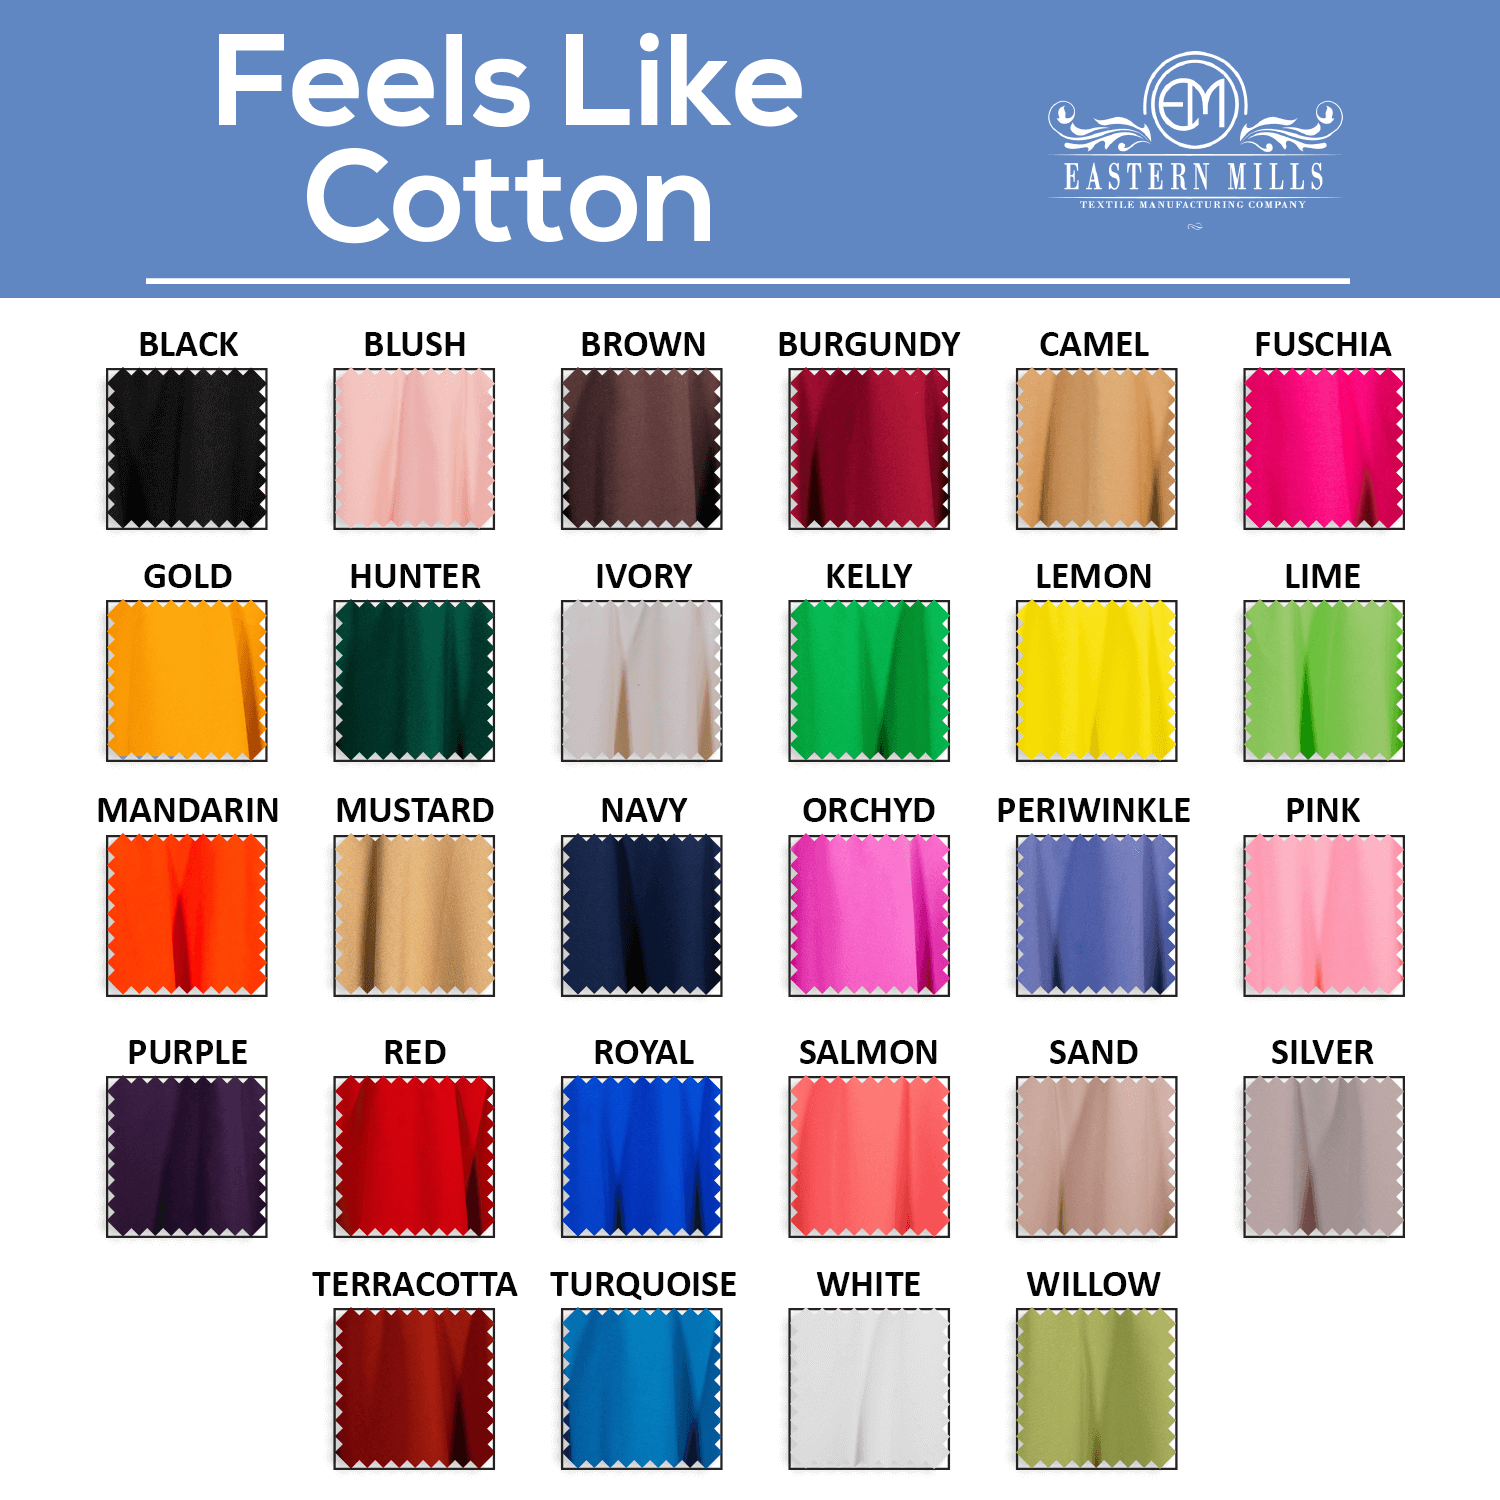 https://www.eventsupply.com/images/big/FEELS-LIKE-COTTON-Solid-fabrics-by-YARD-swatch.png